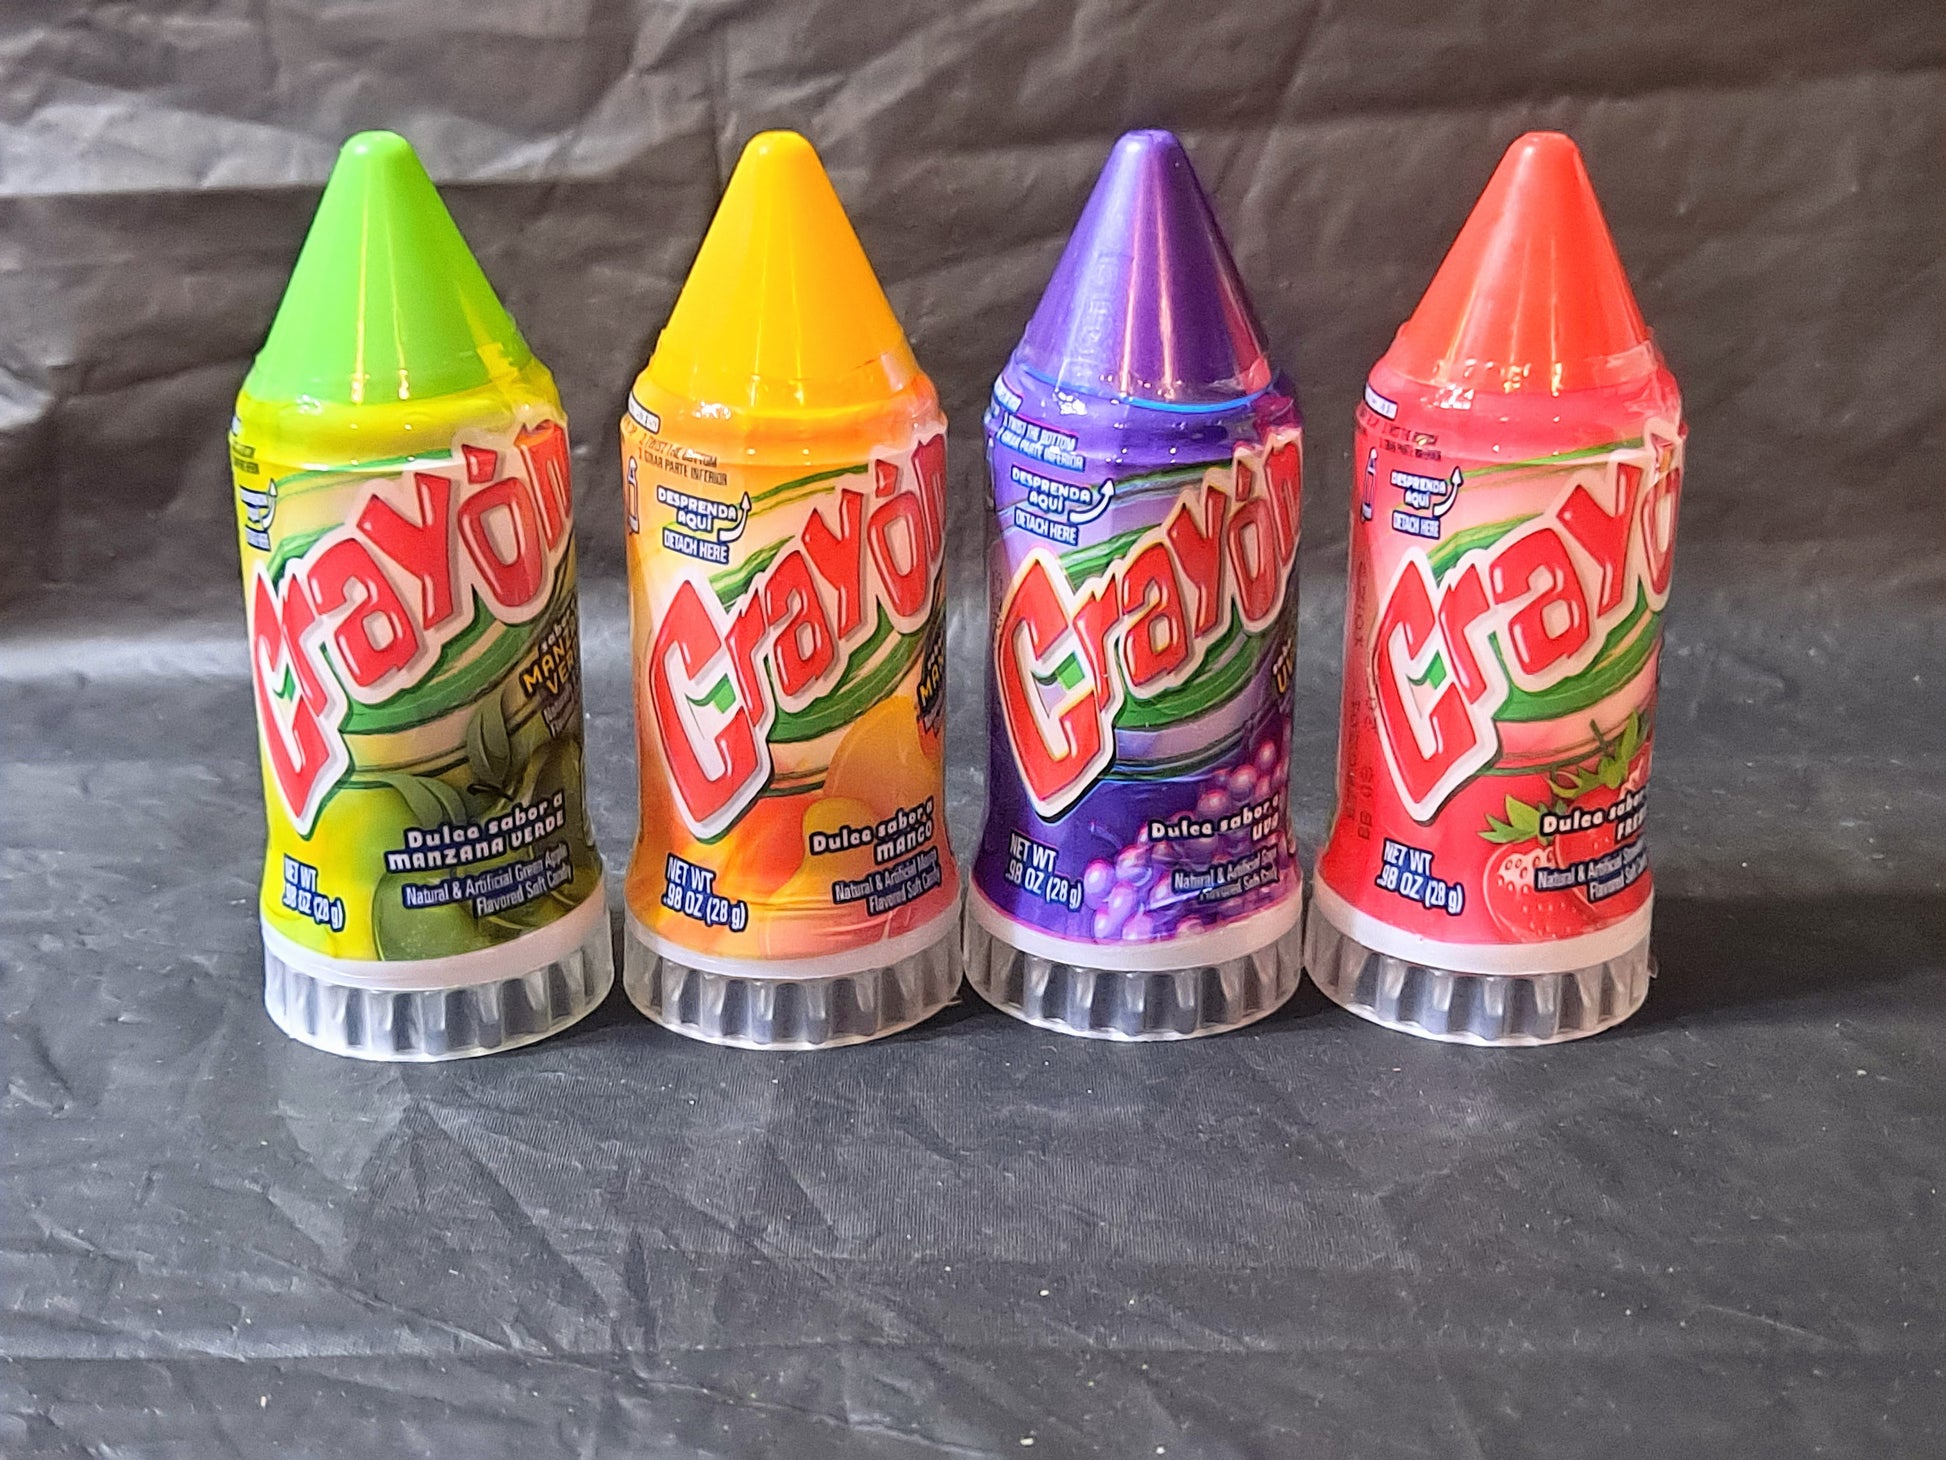 Crayon Flavored Soft Candy